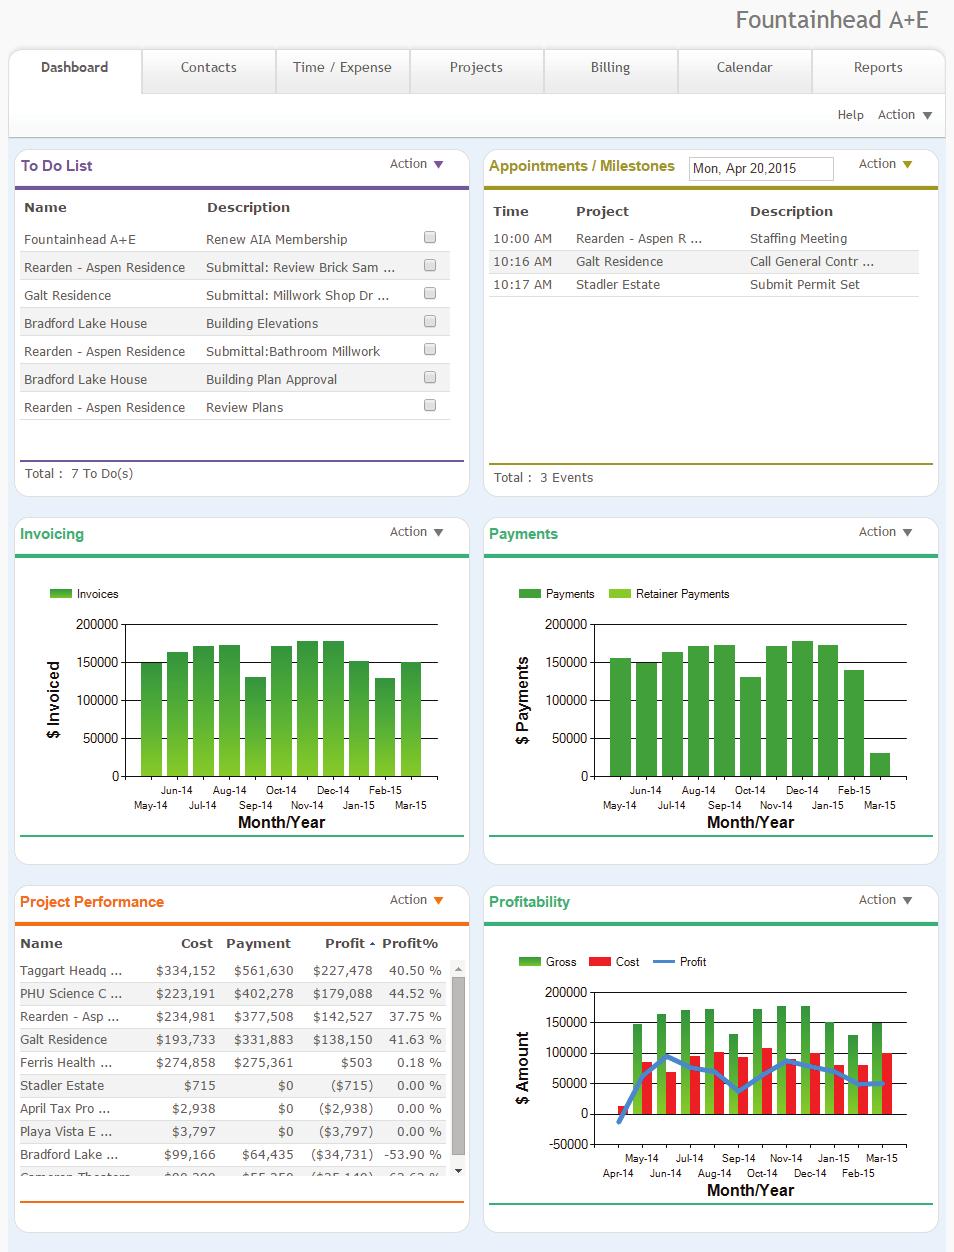 Simple Usability Intuitive Time and Expense Tracking Monitor Key Performance Indicators like Project Performance, Time and Expense and Profitability on an organized Dashboard.